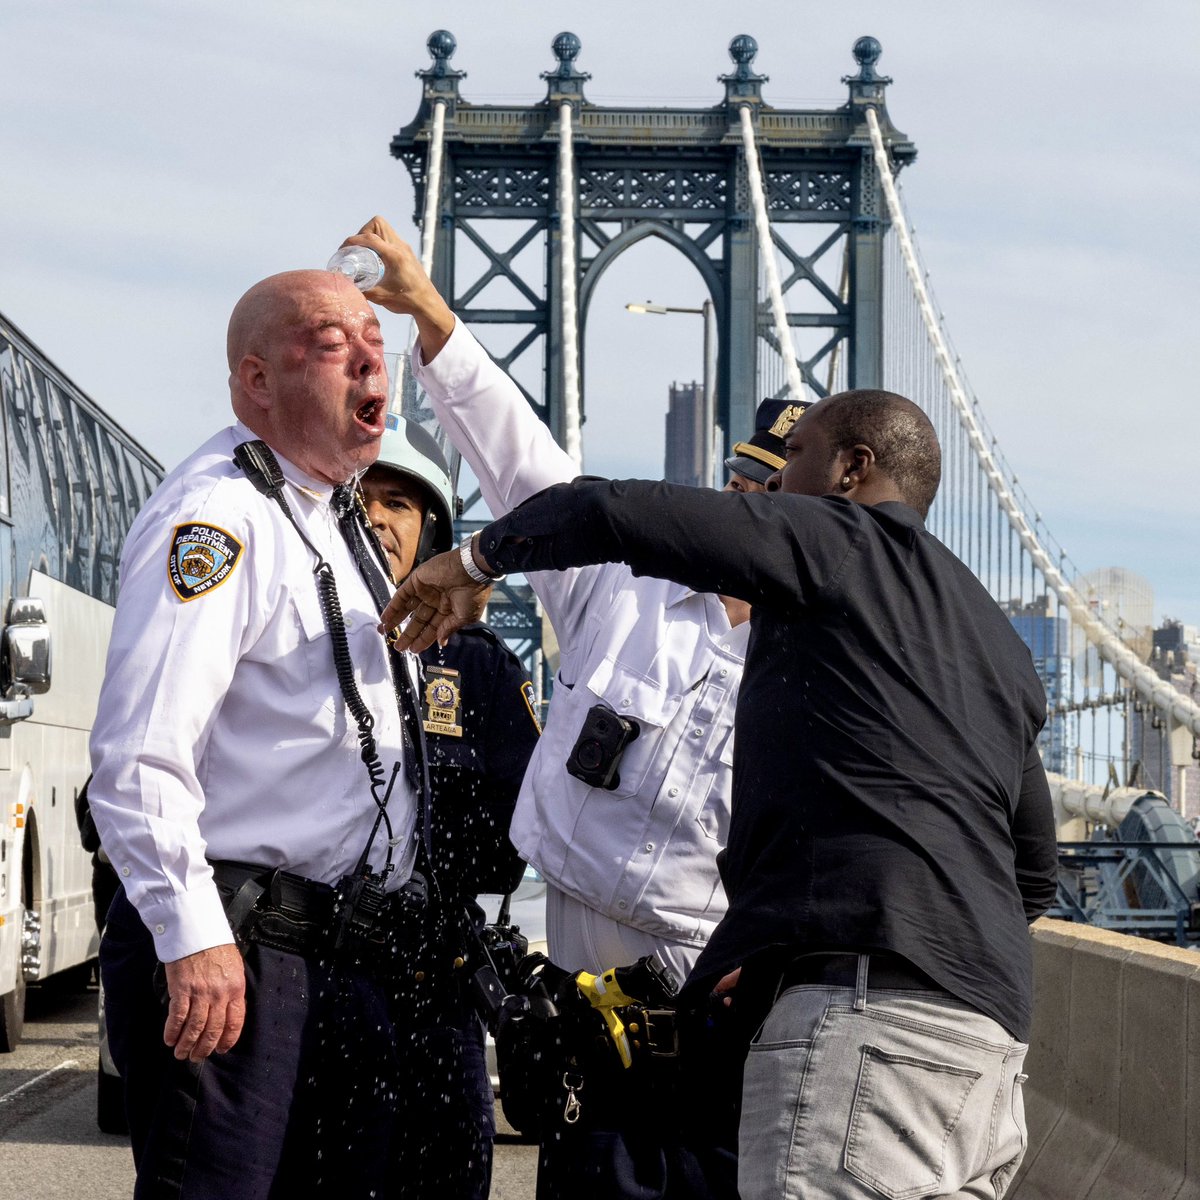 NYPD Assistant Chief James McCarthy is assisted after being affected by a chemical irritant. Video of the incident appears to show McCarthy deploy his pepper spray - possibly injuring himself. May 11, 2024 in New York City. For @gettyimages